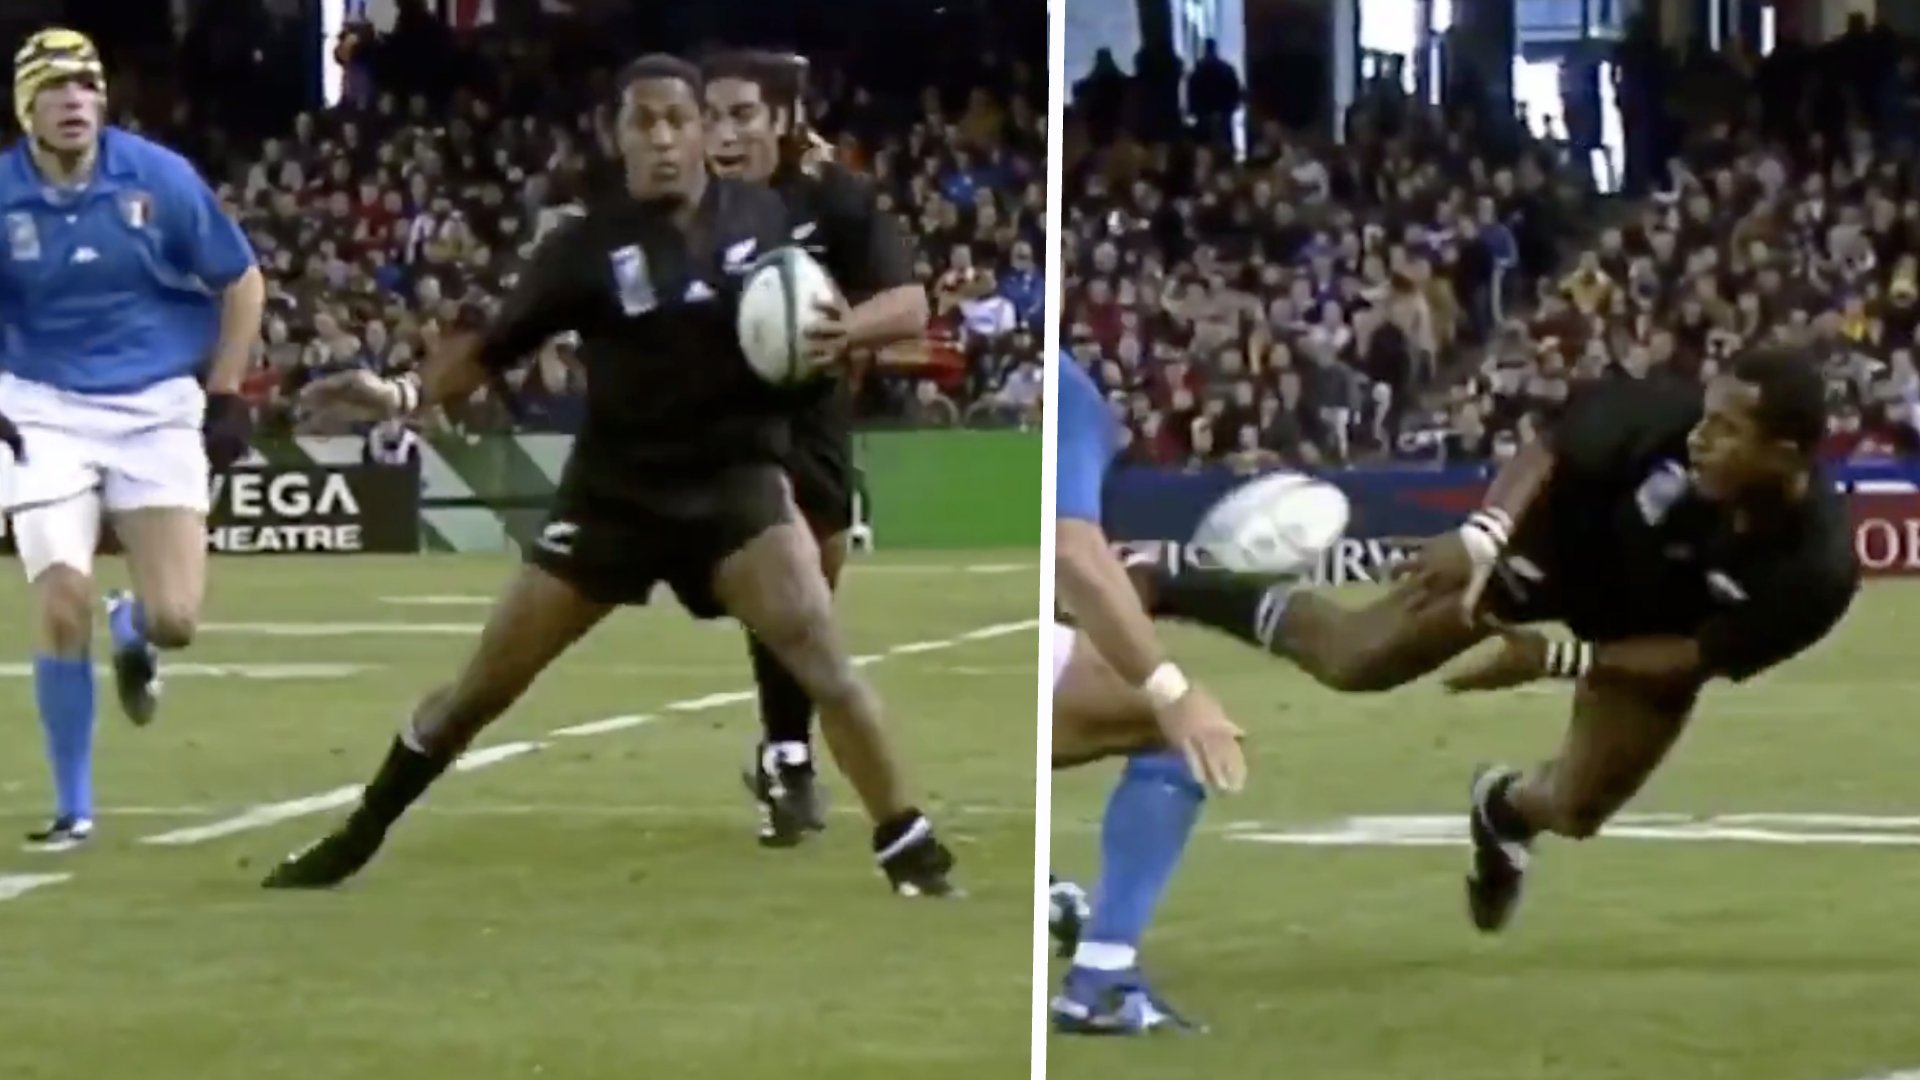 WATCH: Throwback to when Joe Rokocoko mugged off half the Western World with reverse pirouette